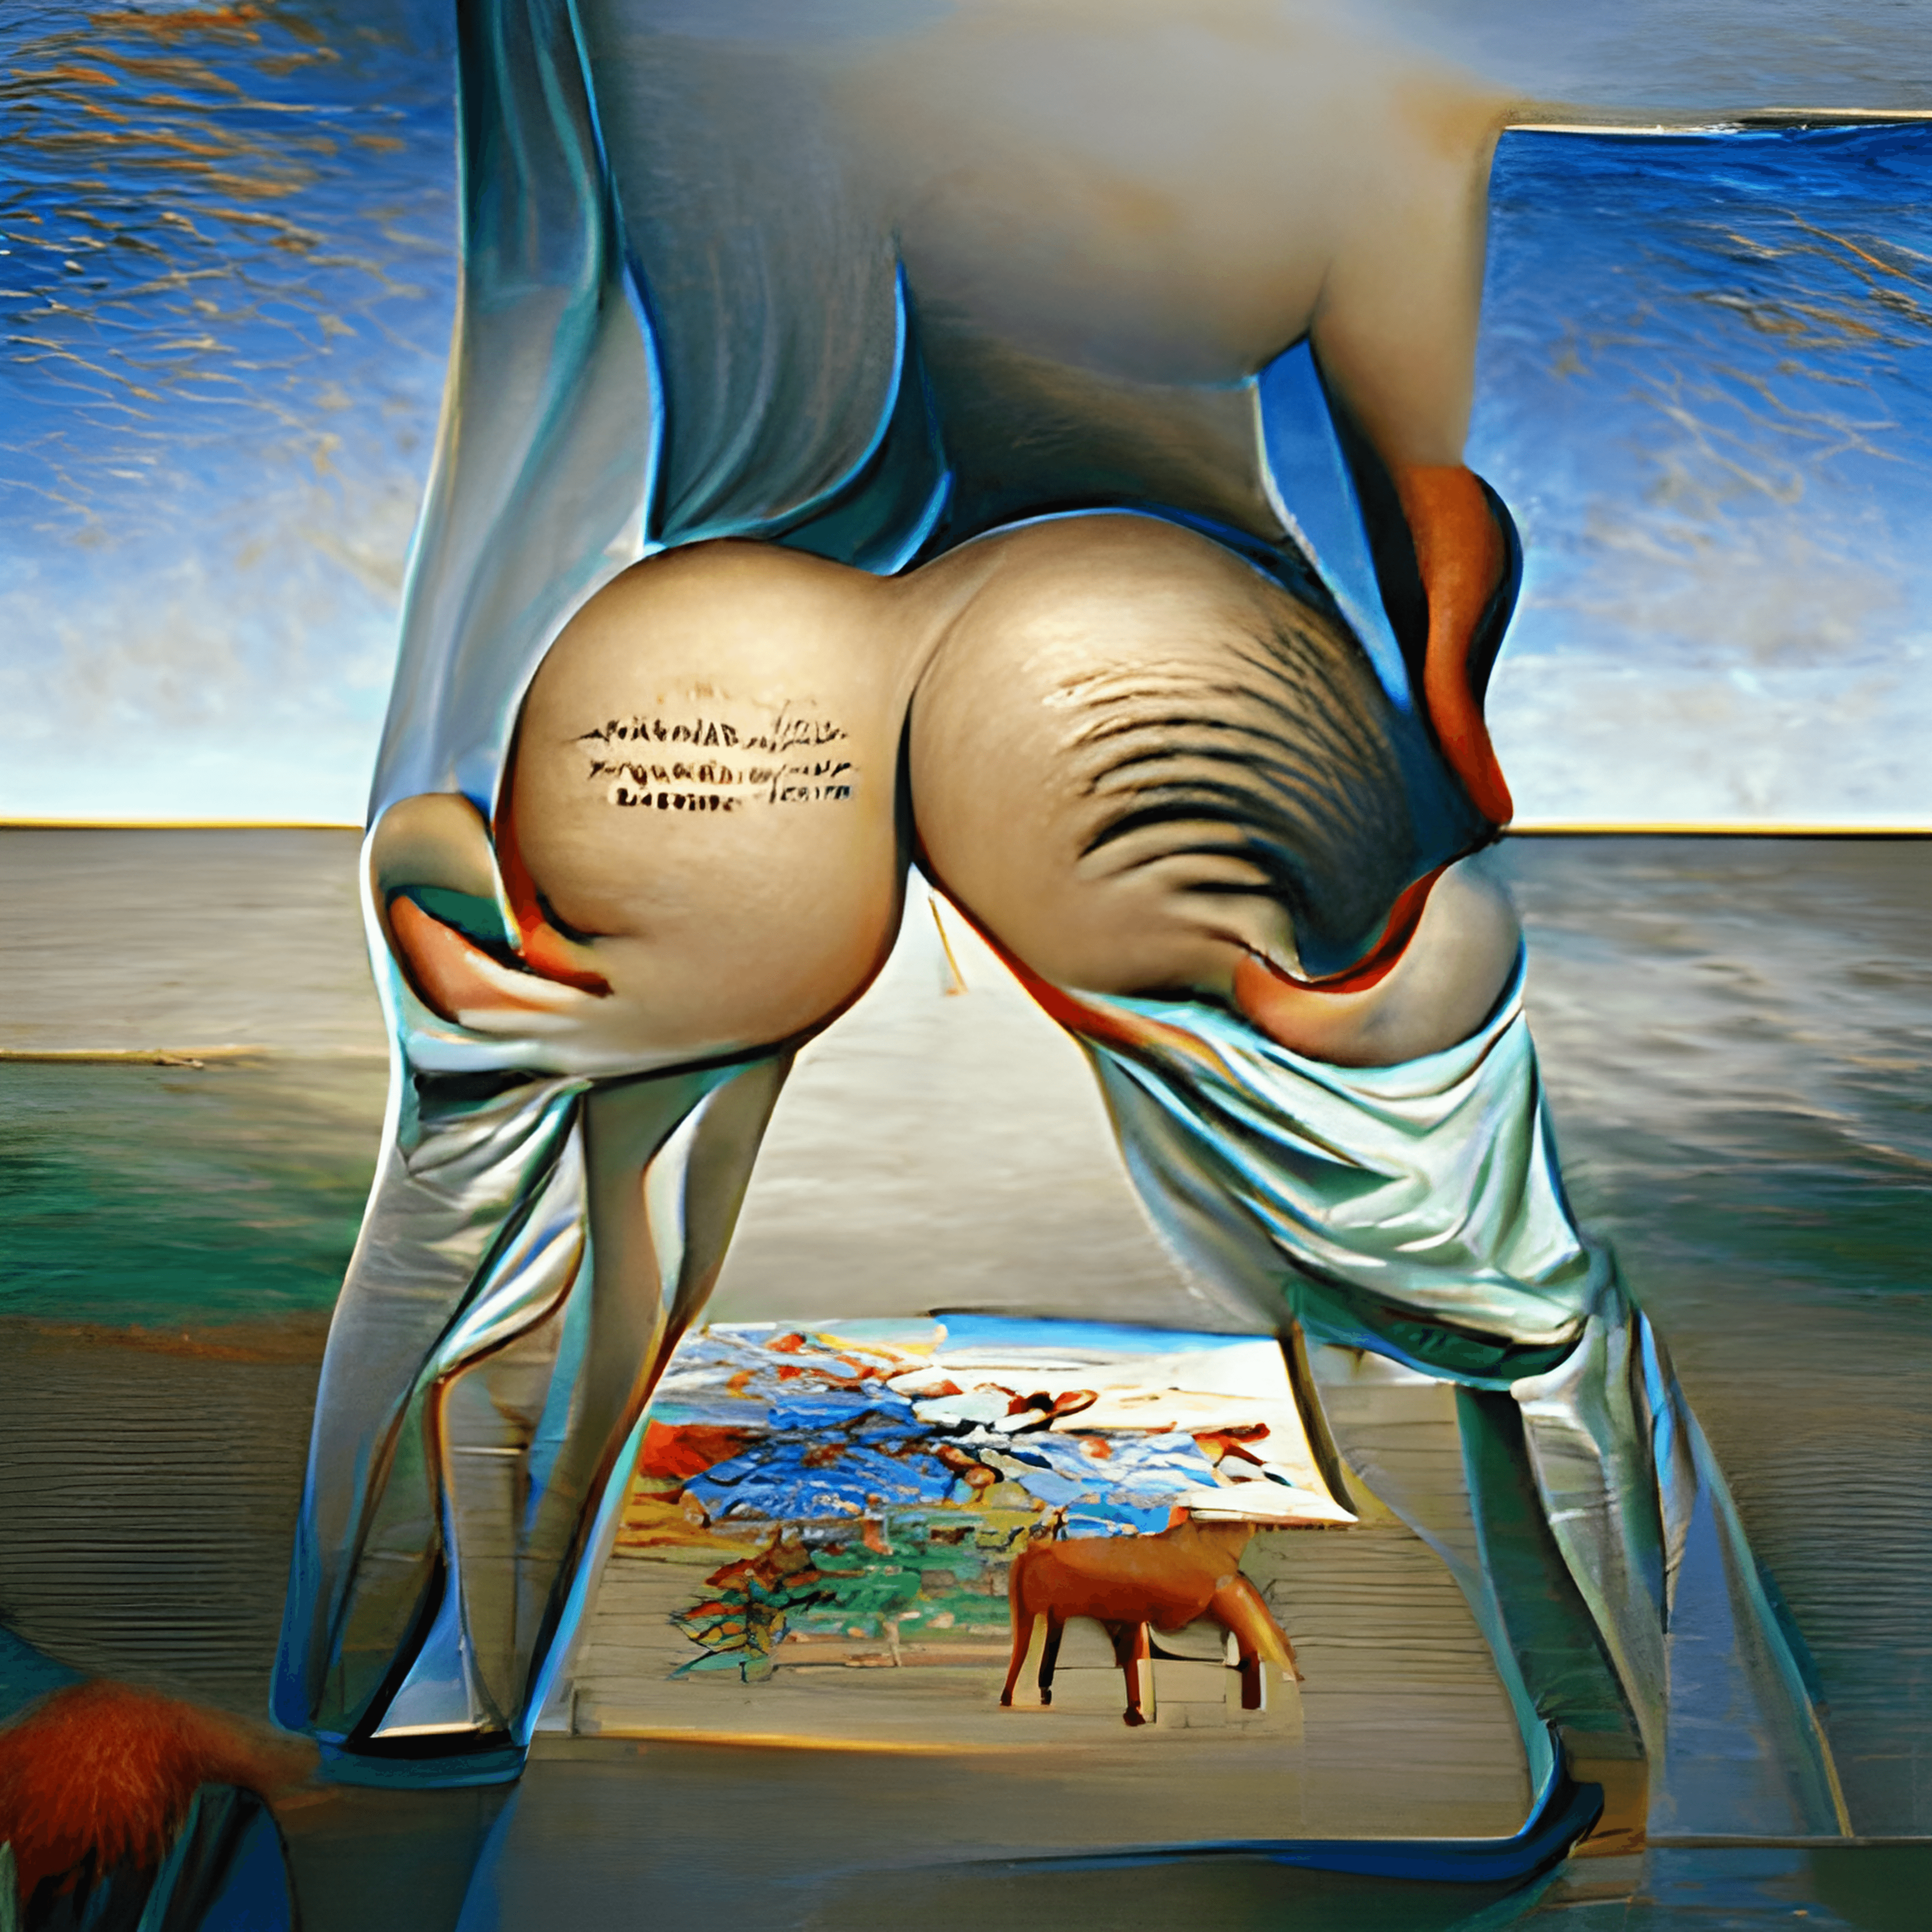 the art with the ass